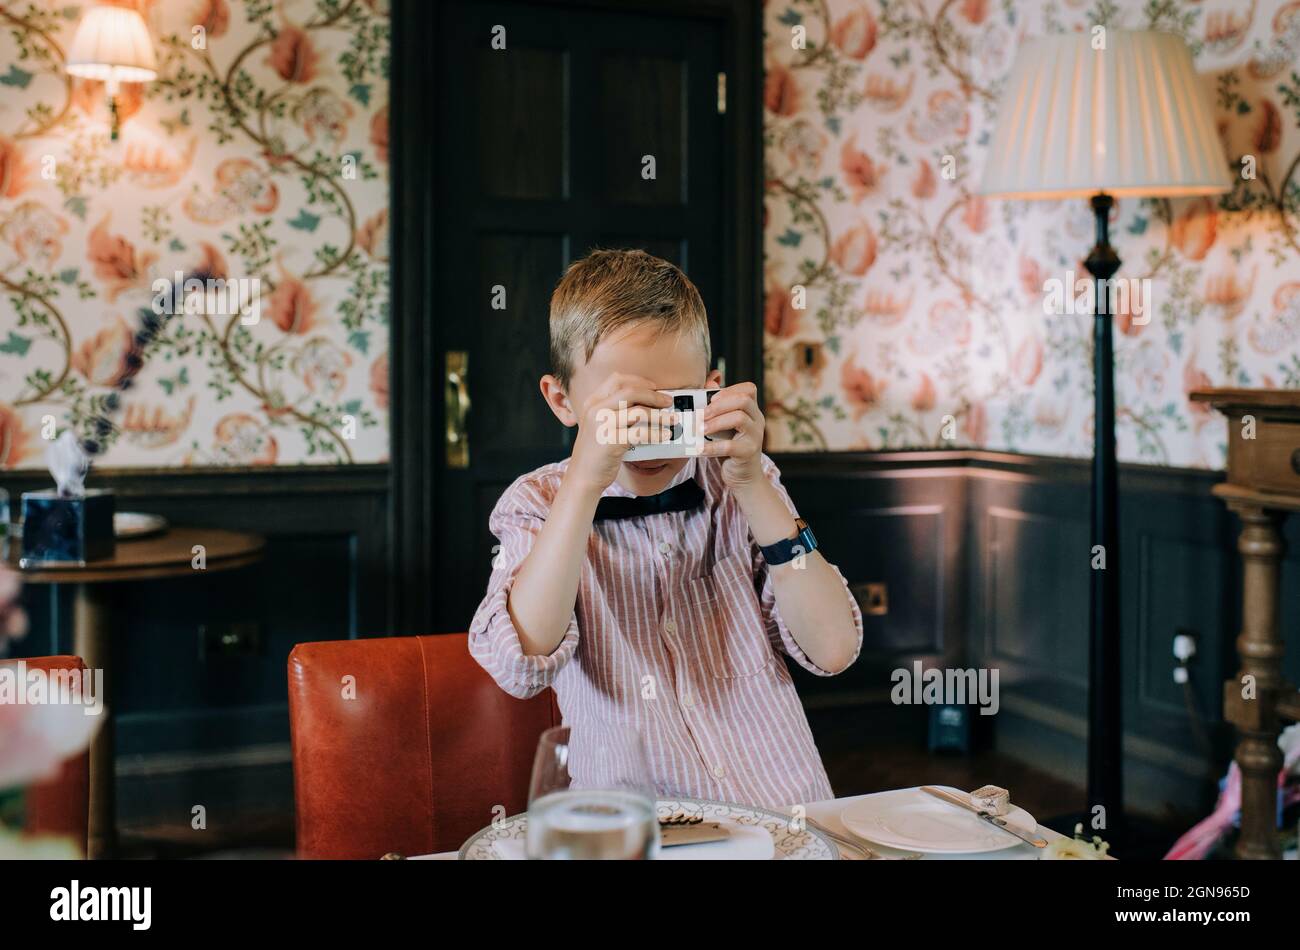 boy taking pictures with disposable camera at a wedding Stock Photo